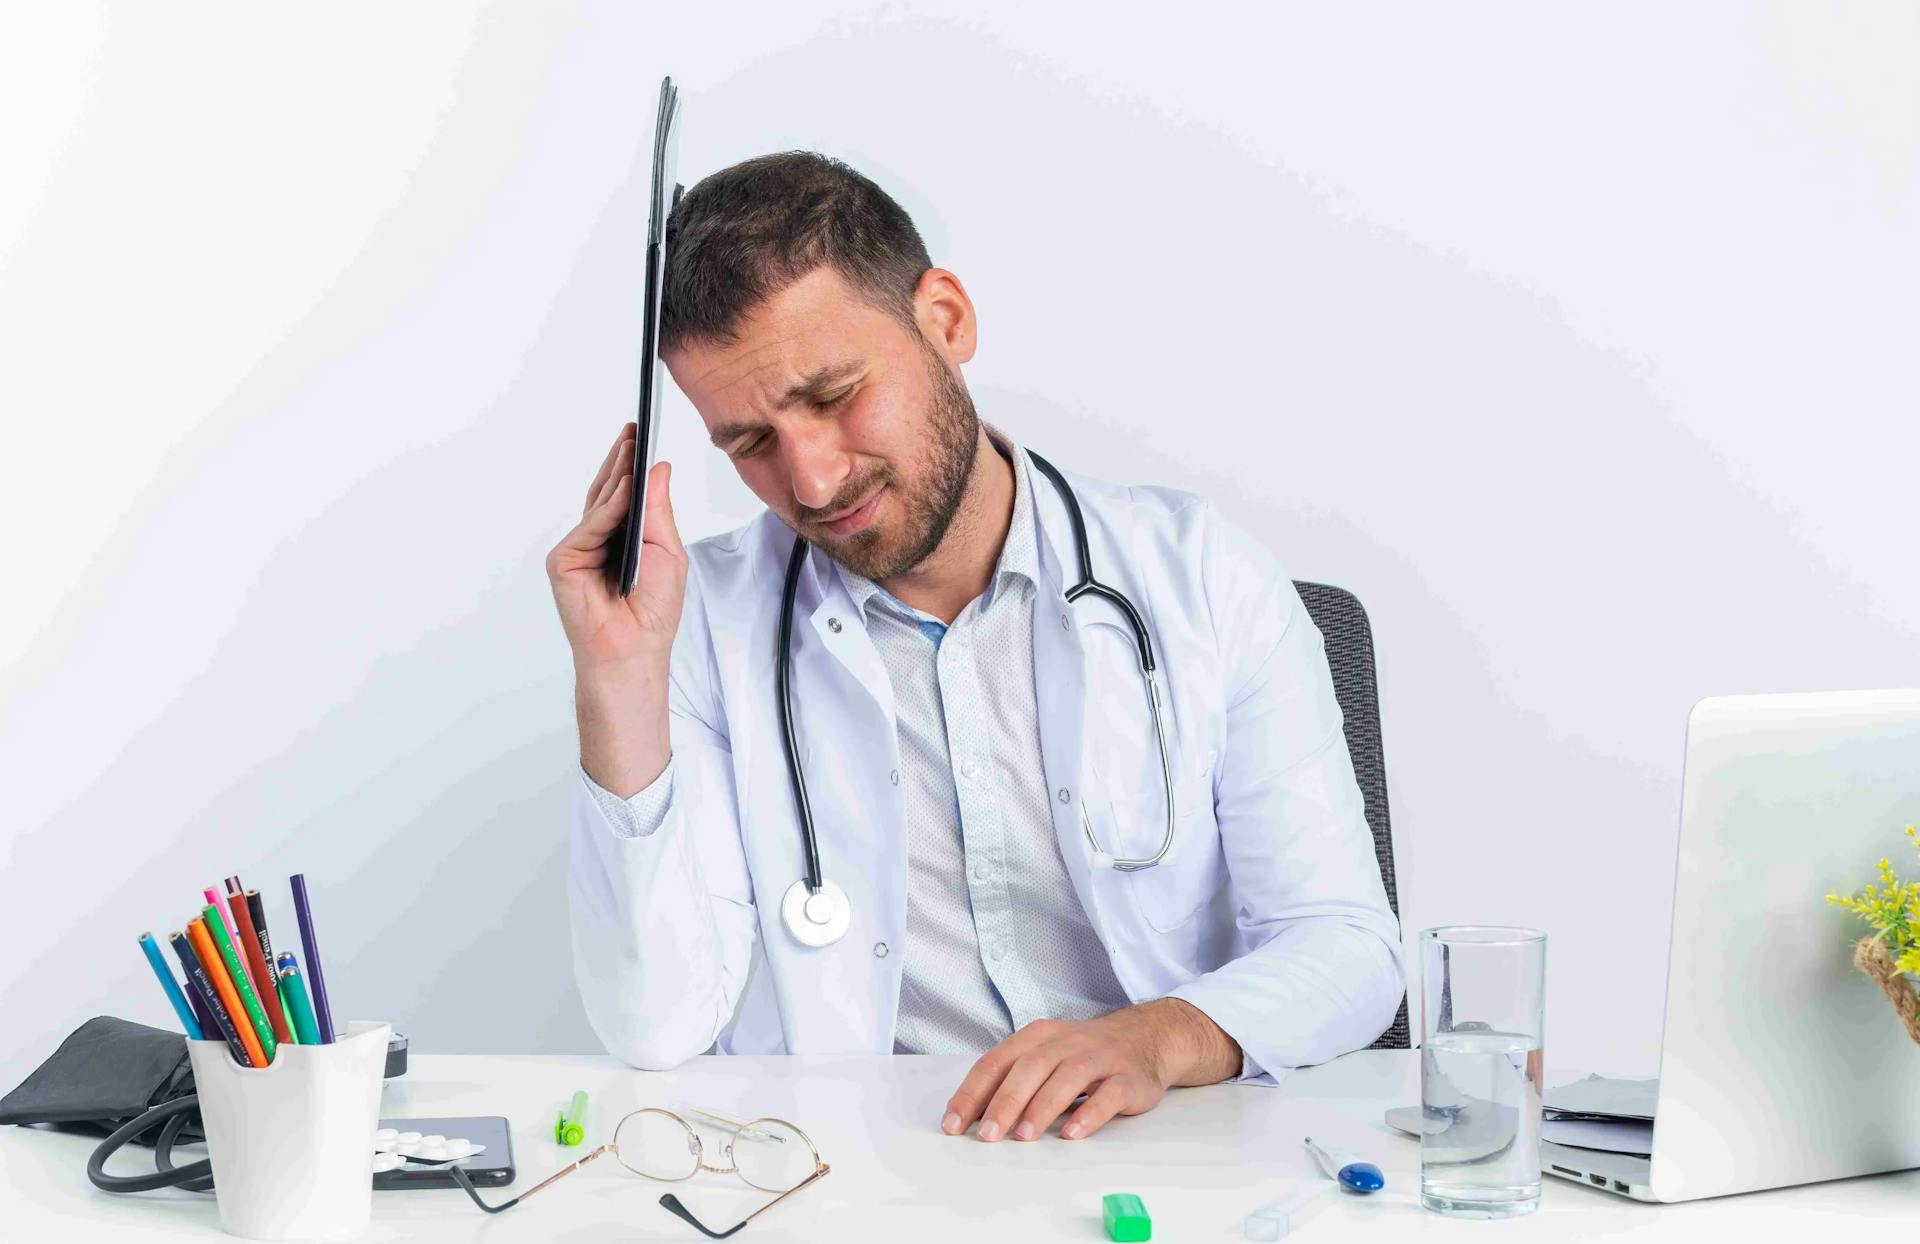 https://strapiassetsprod.s3.amazonaws.com/young_man_doctor_white_coat_with_stethoscope_holding_clipboard_his_head_looking_tired_overworked_sitting_table_with_laptop_white_wall_11zon_1_0b505c7751.webp